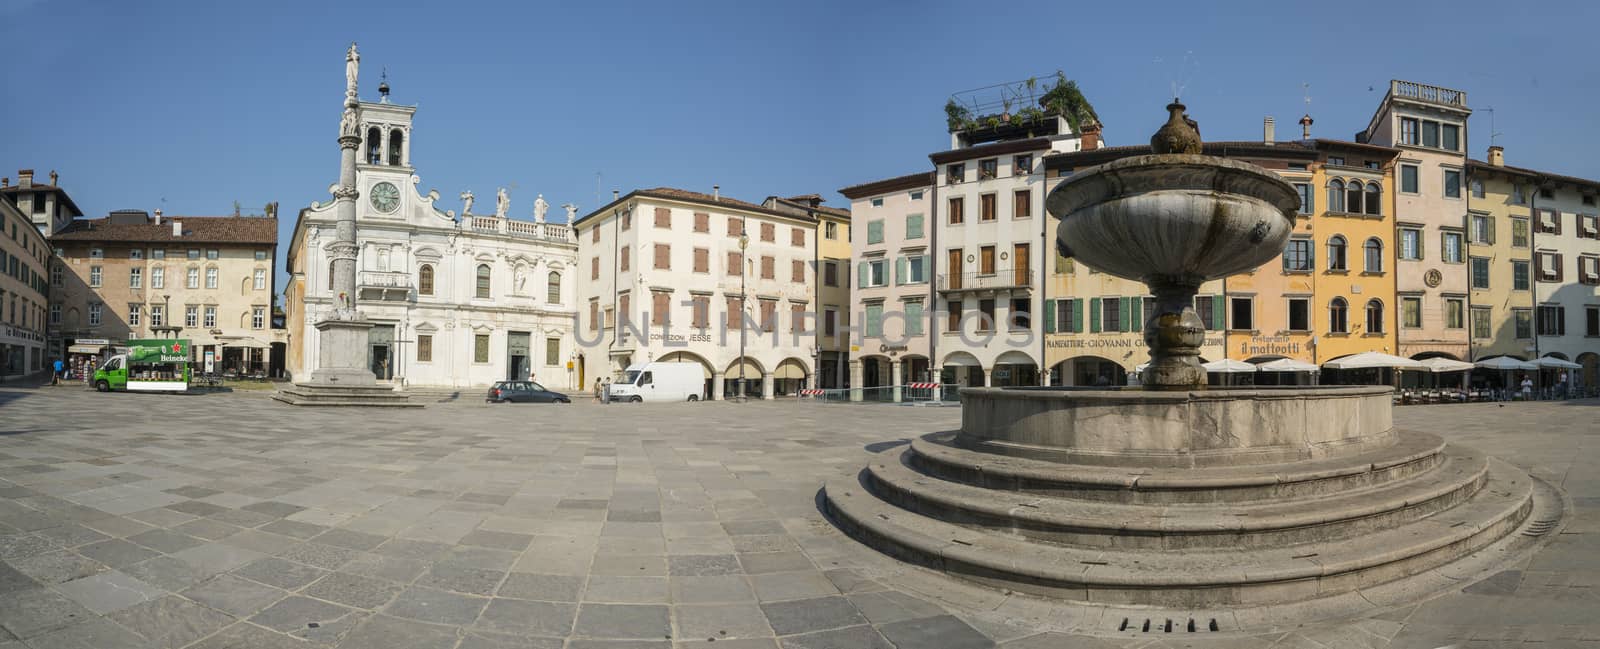 The fountain in Matteotti Square in Udine by sergiodv